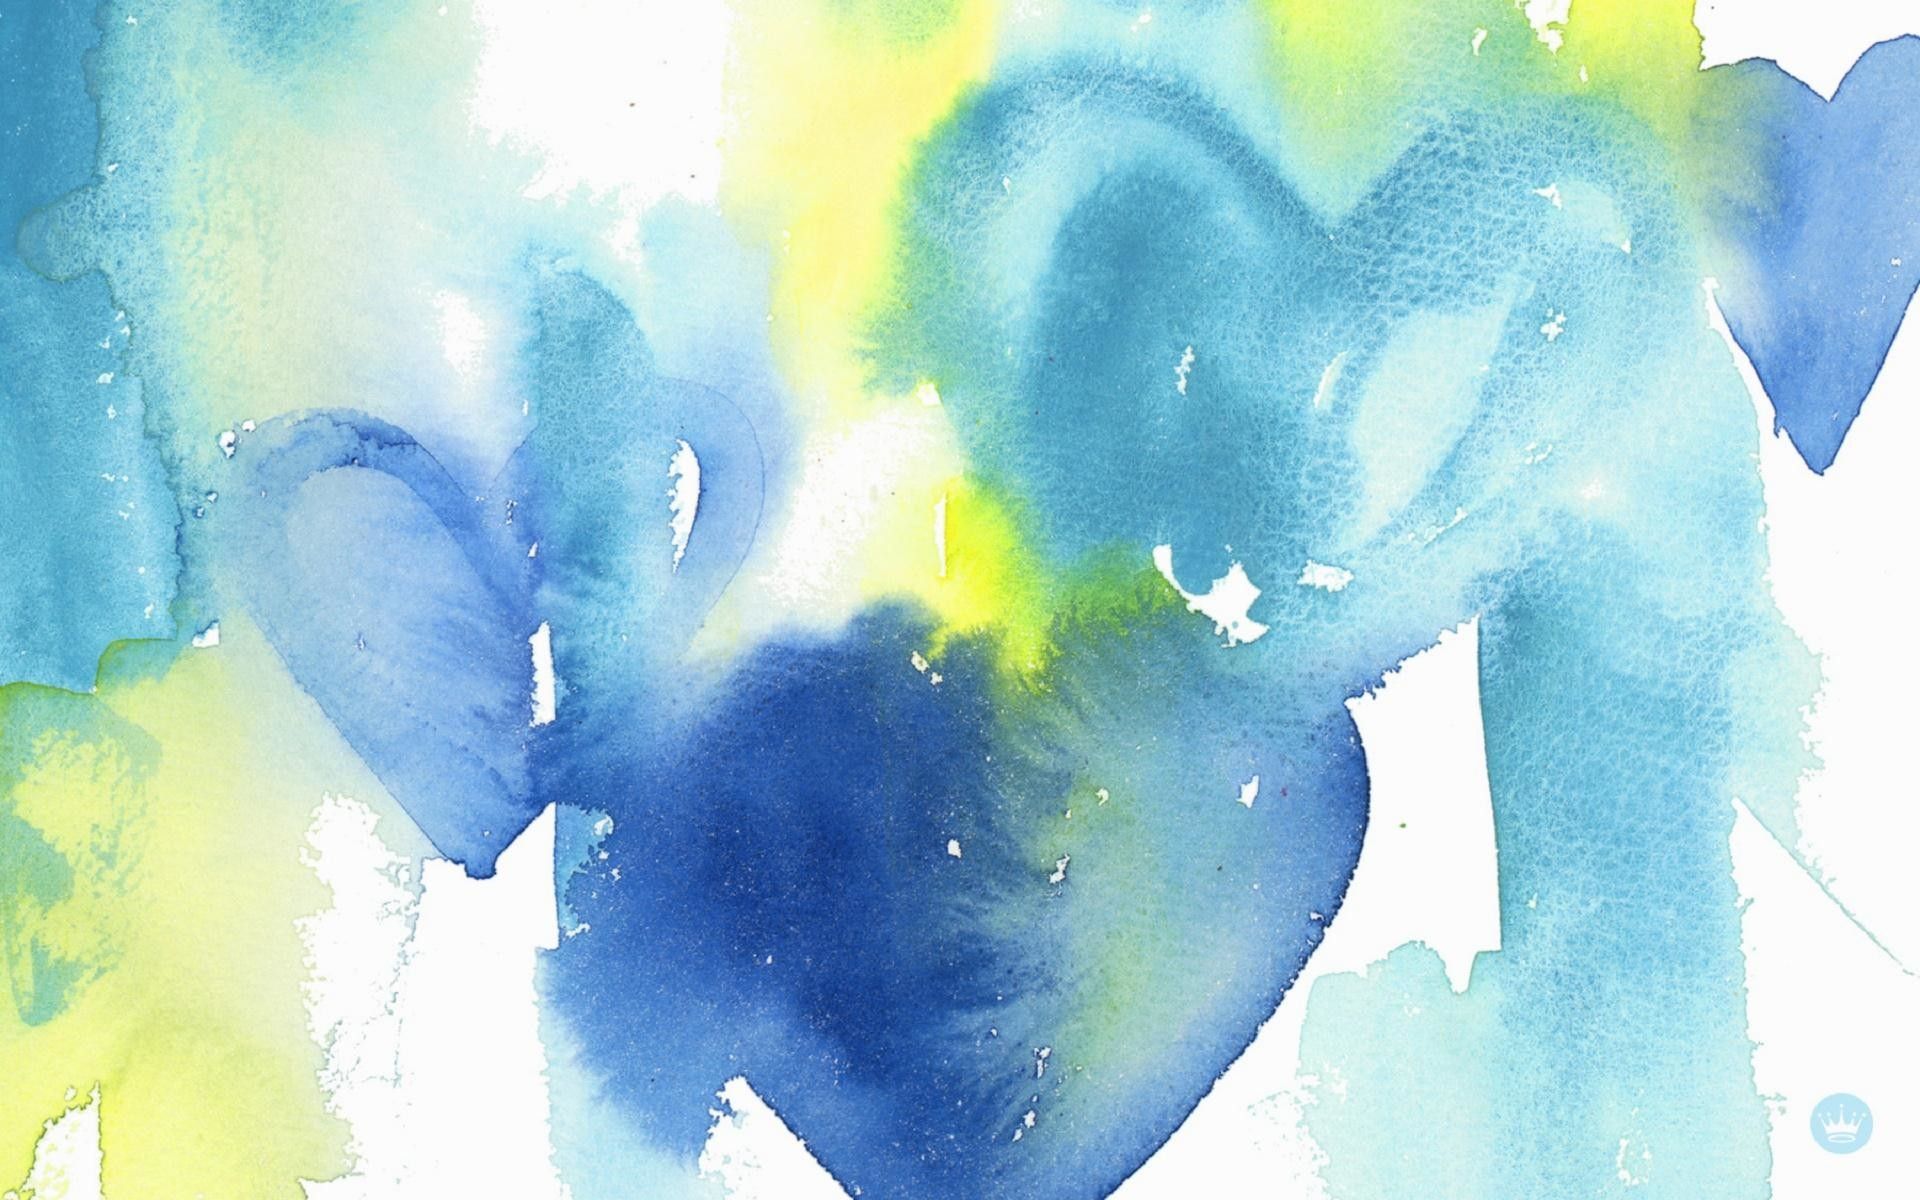 Watercolor blue hearts on a white background - June, watercolor